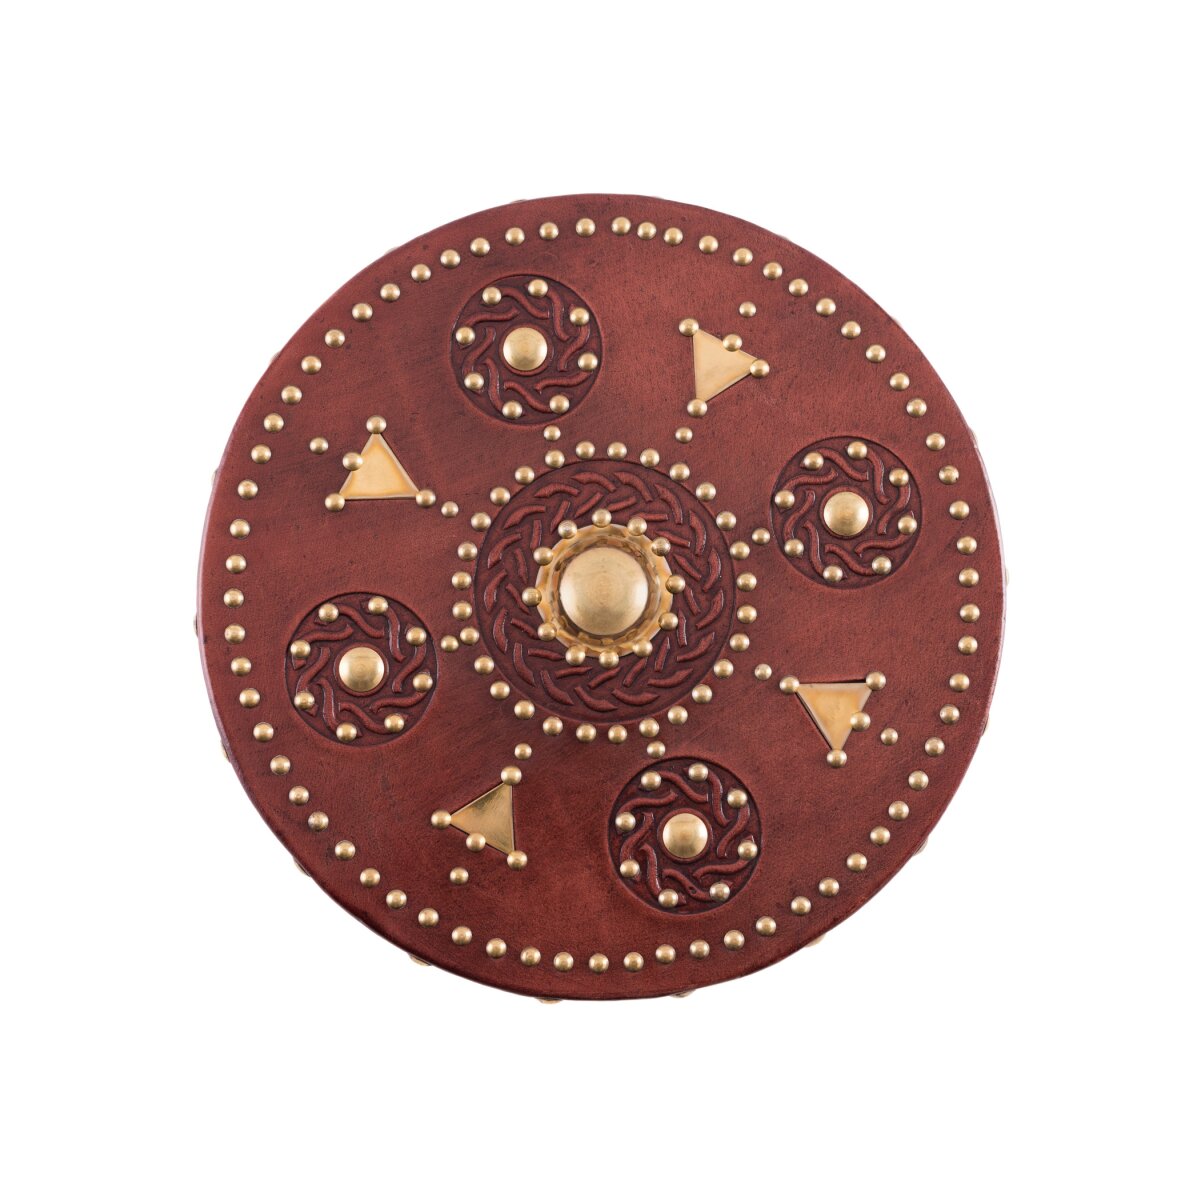 Mini-Target, small Scottish round shield with brass fittings